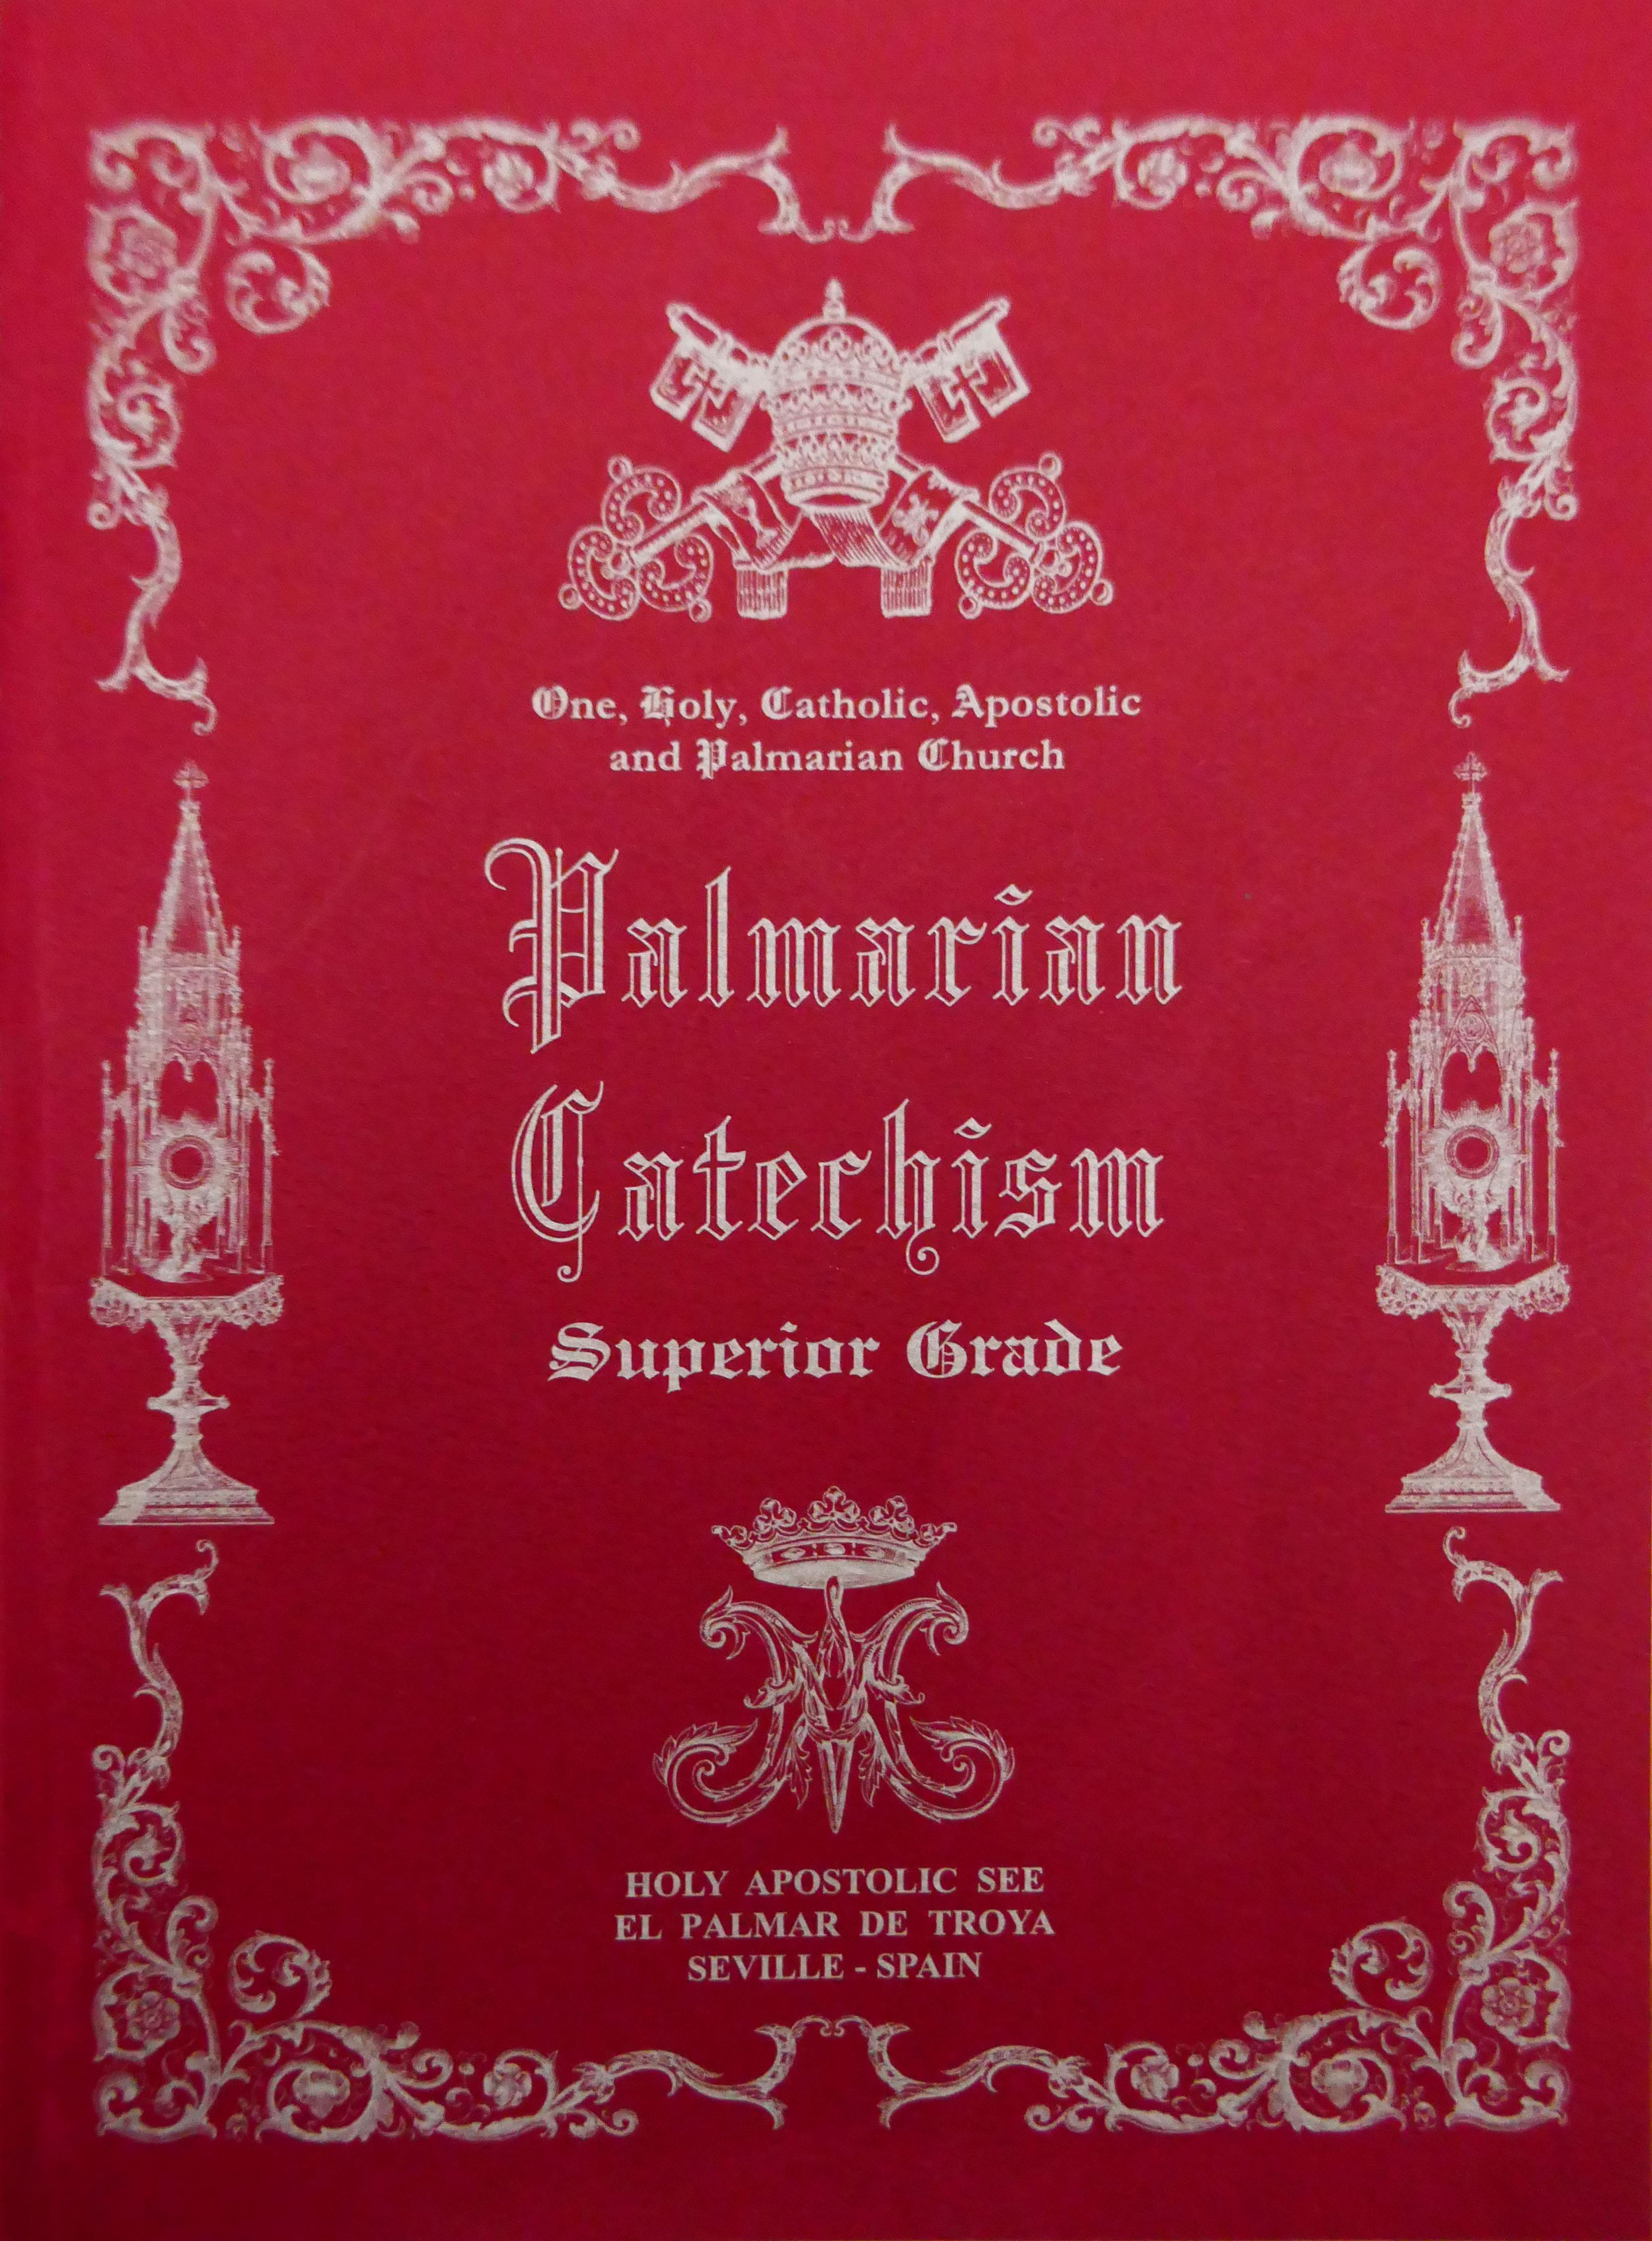 <a href="https://www.palmarianchurch.org/wp-content/uploads/2019/03/Extracts-from-the-Palmarian-Catechism.pdf" title="Extracts from the Palmarian Catechism">Extracts from the Palmarian Catechism  <br> <br> See more</a>